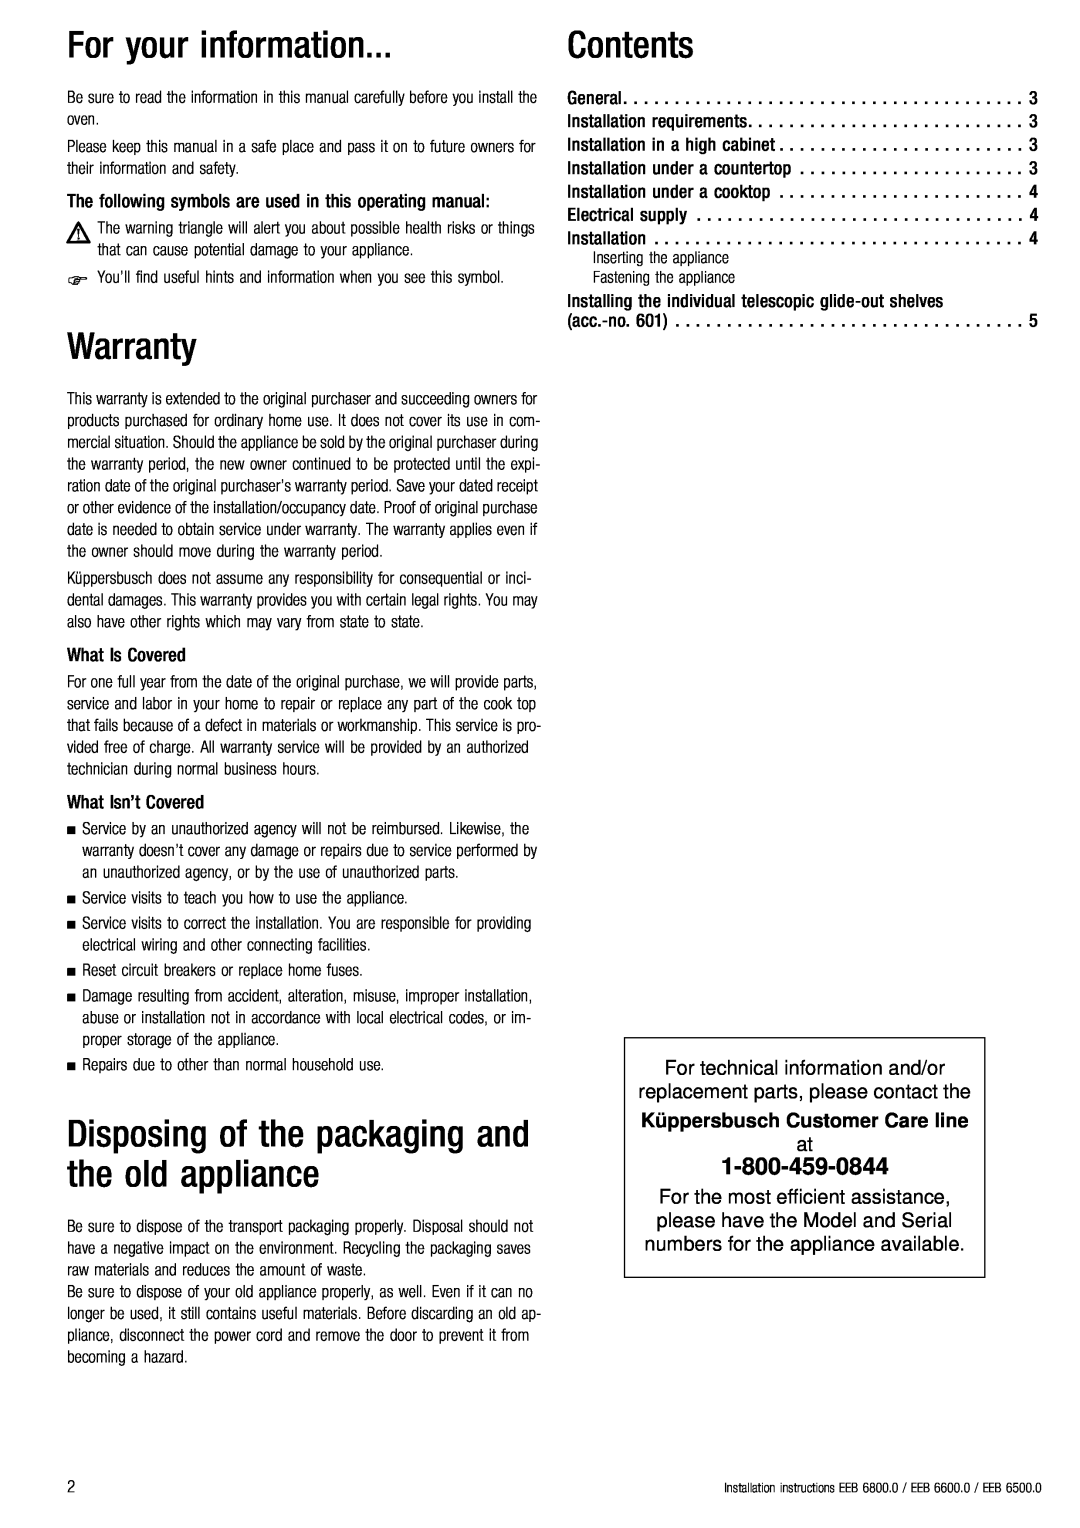 Kuppersbusch USA EGS 304.2 For your information, Warranty, Disposing of the packaging and the old appliance, Contents 